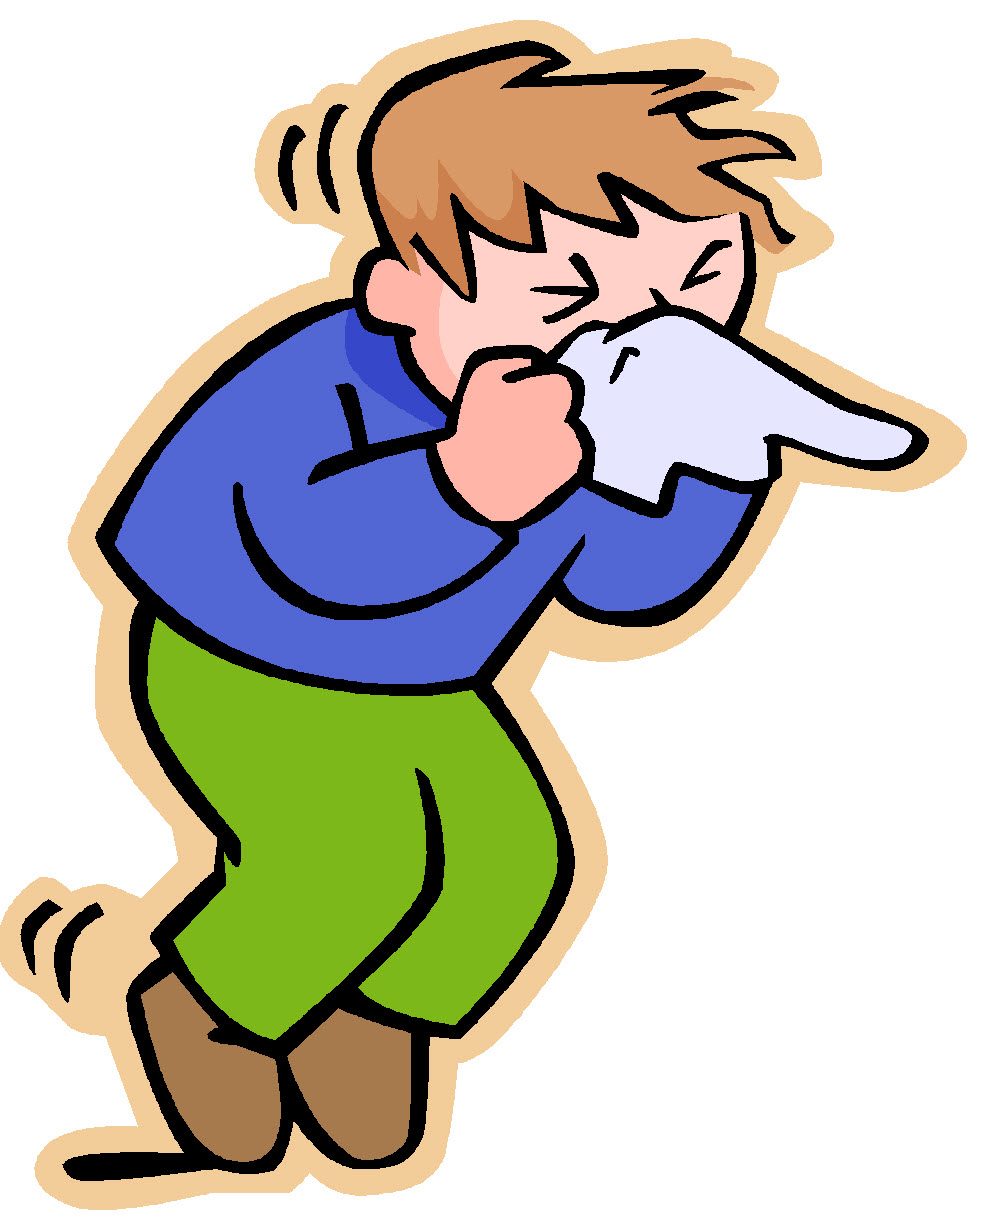 Sick person with flu clipart